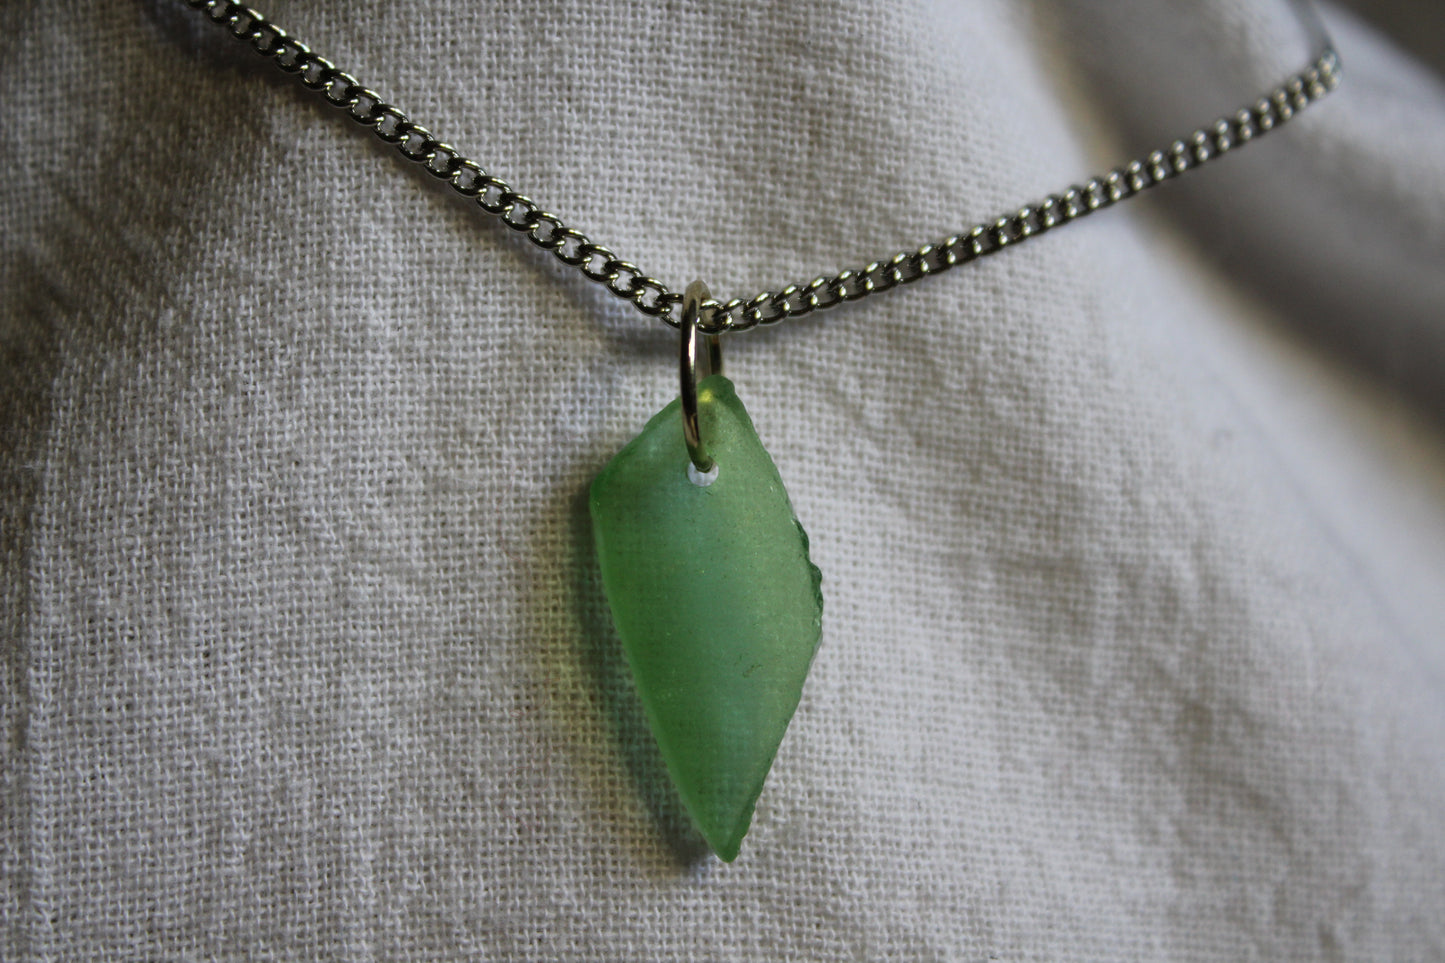 Beach Glass Necklace - Green Eyed Lady